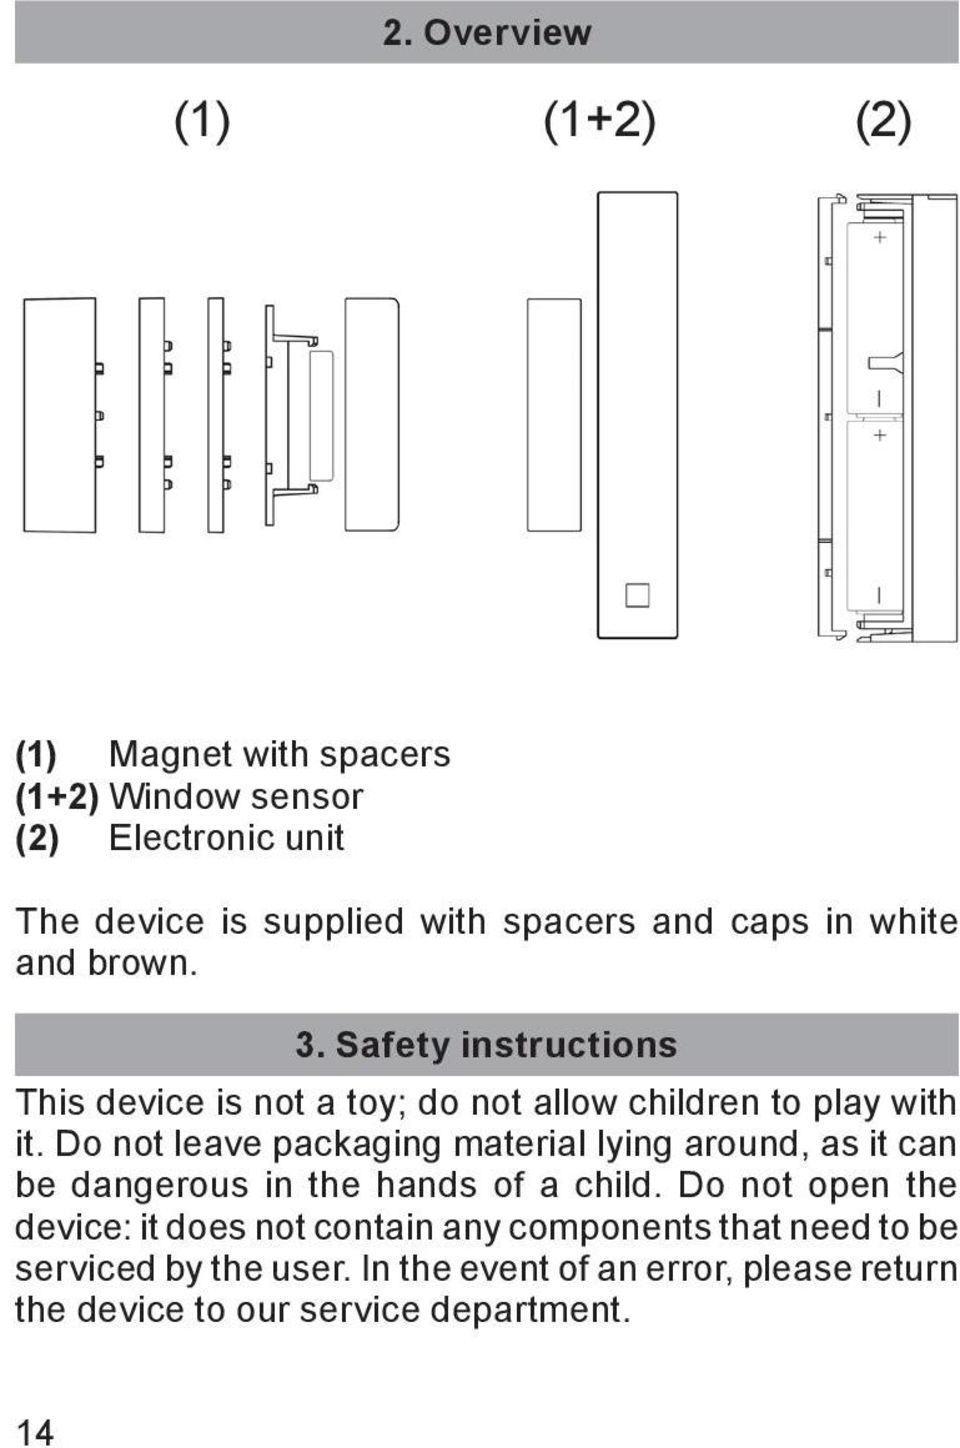 Do not leave packaging material lying around, as it can be dangerous in the hands of a child.